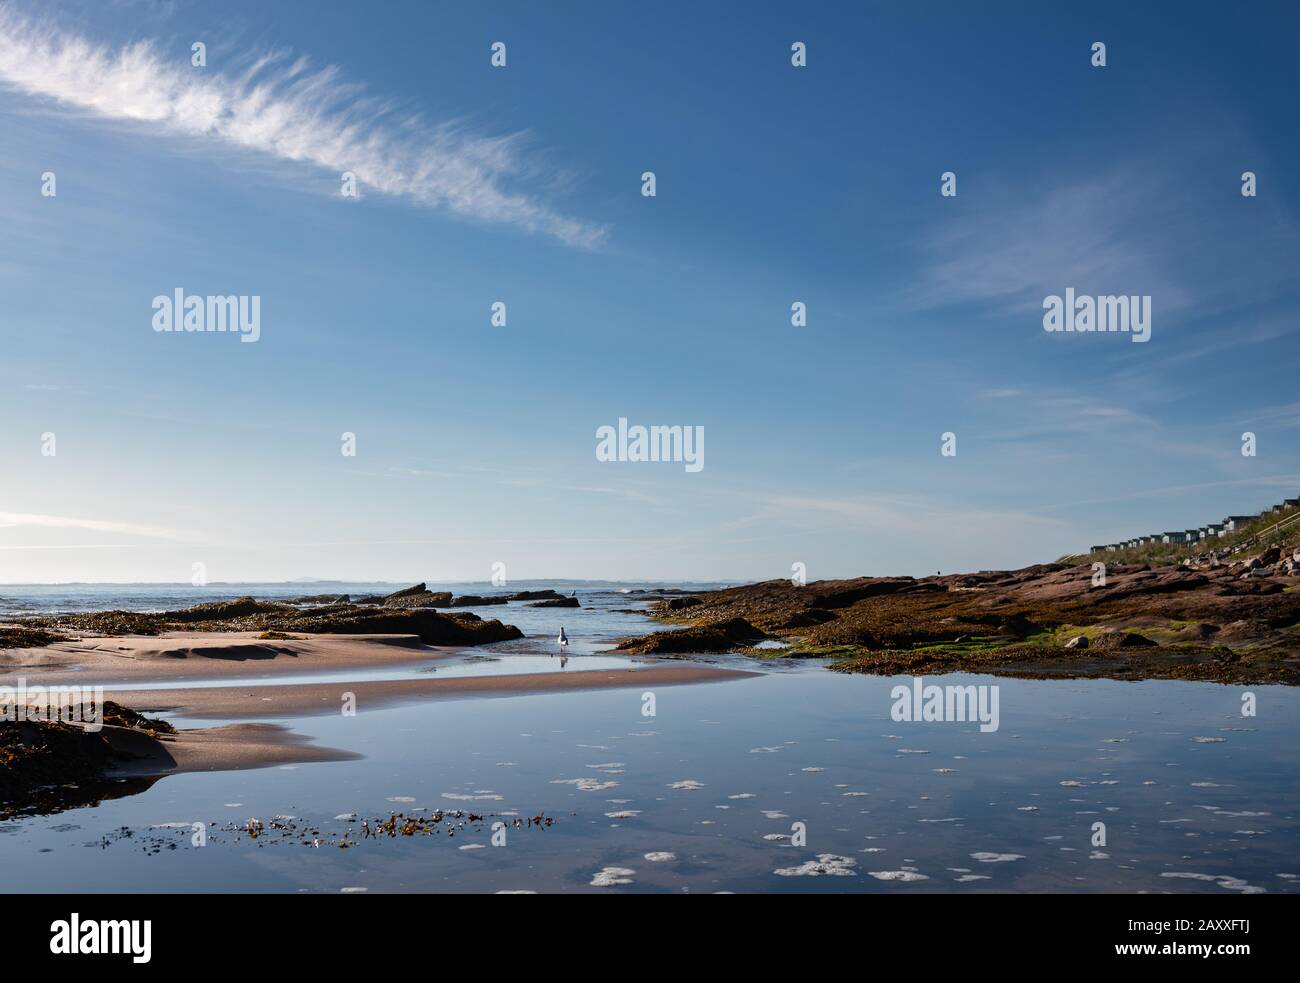 Embo beach, view towards Grannie's Heilan' Hame holiday homes Stock Photo